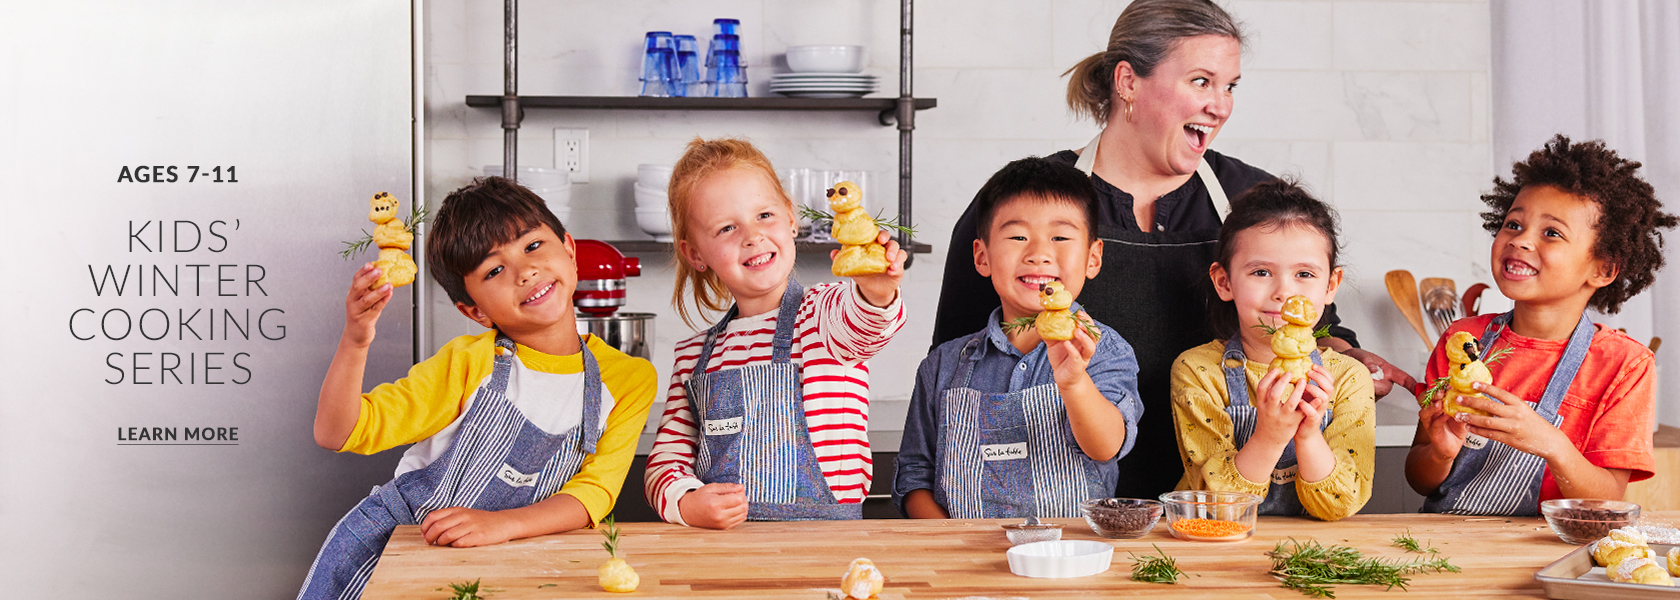 Ages 7 - 11, kids winter cooking series, learn more.